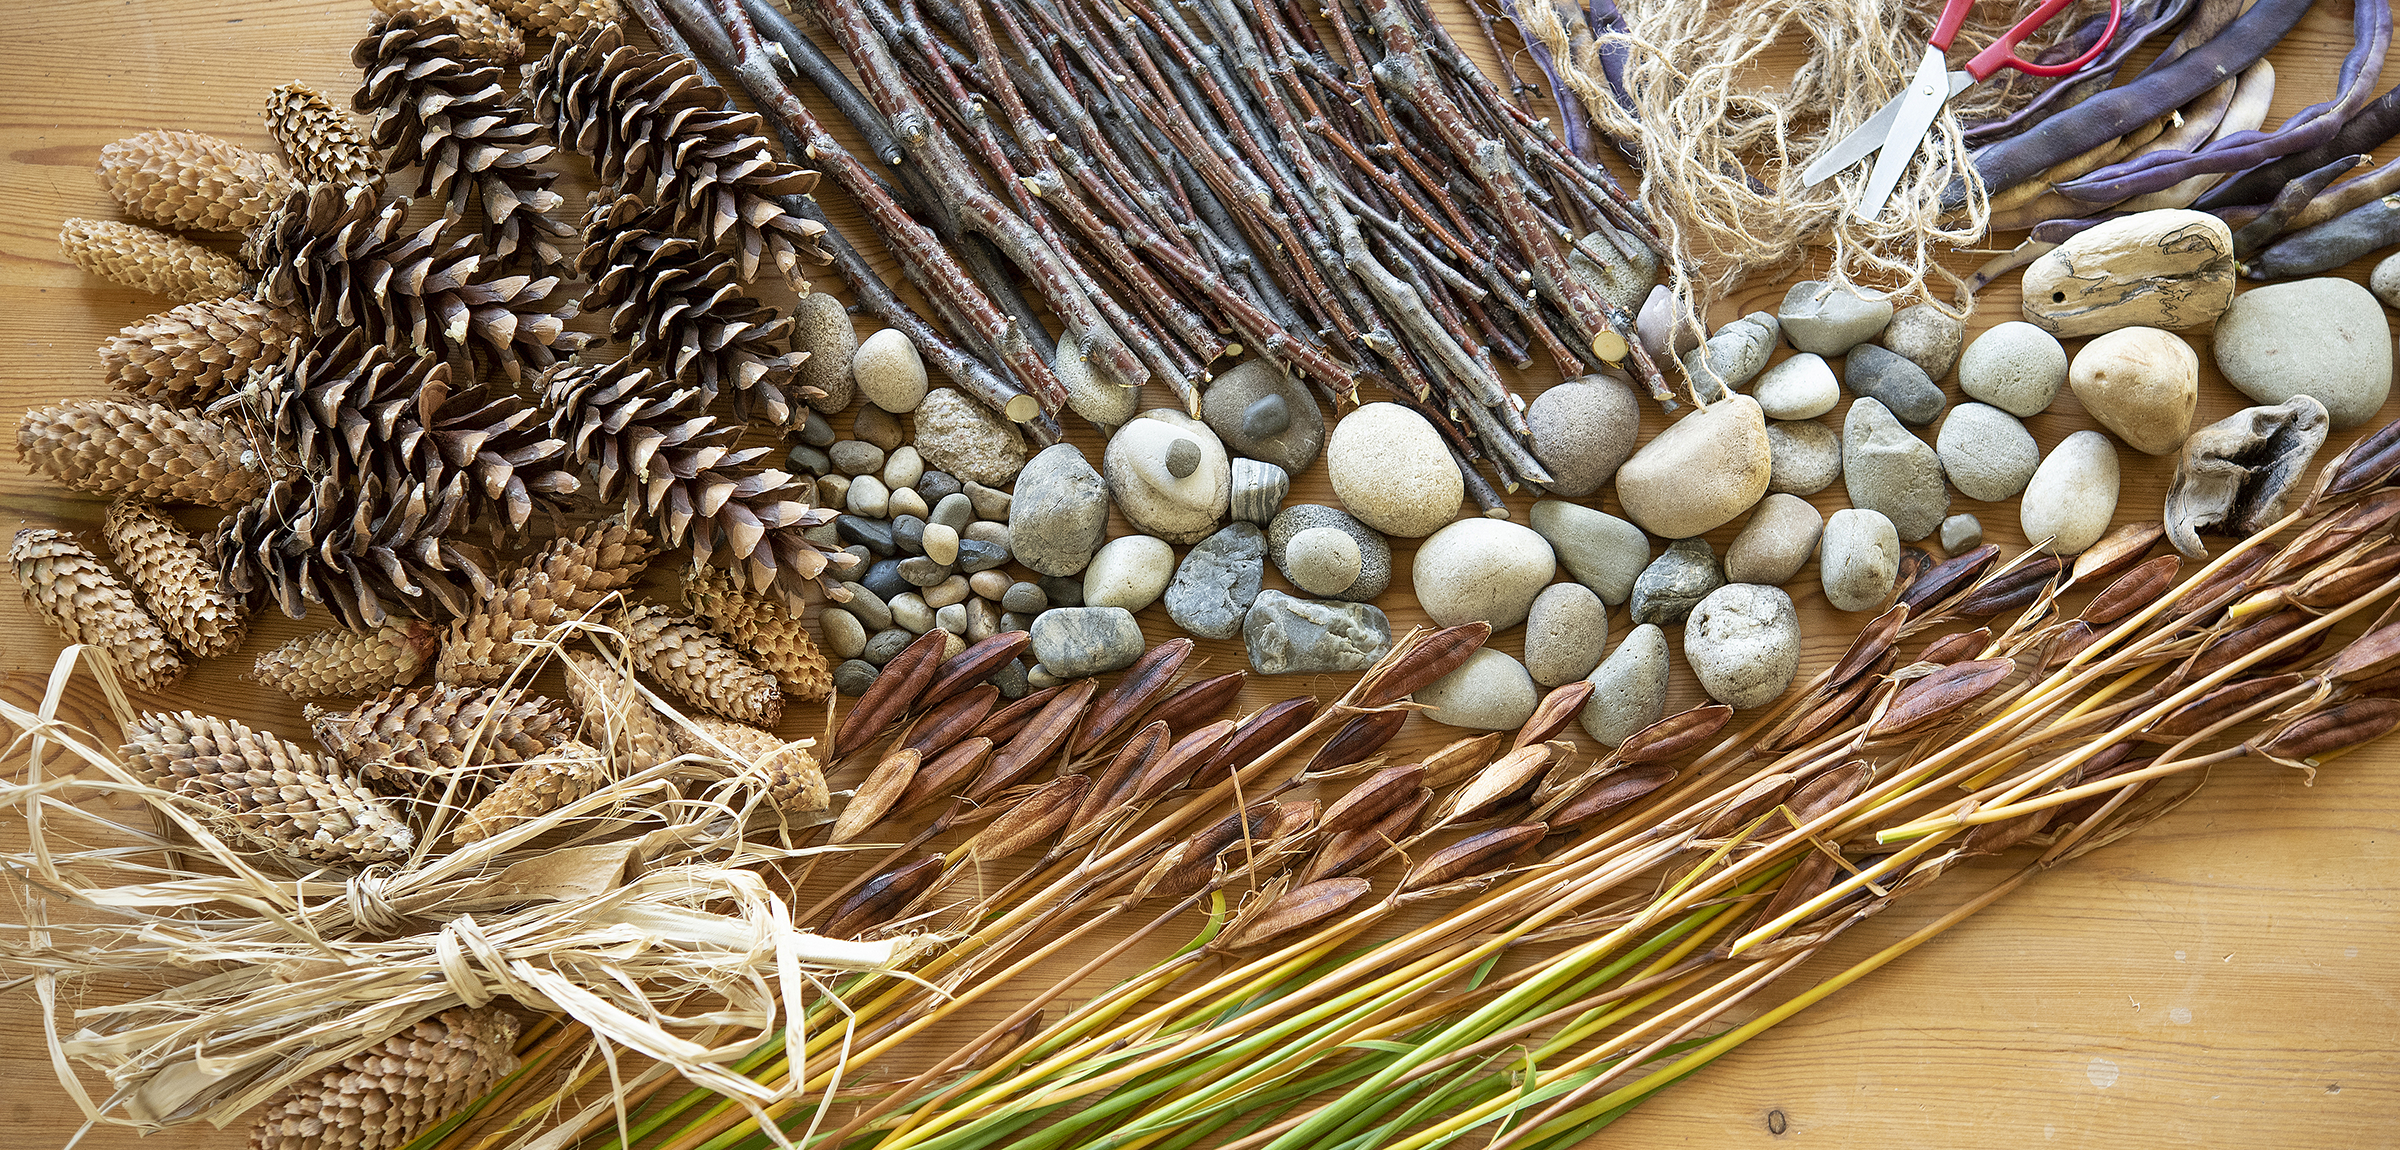 A collection of pine cones, twigs, stones, willow and straw seen from above, on a wooden table